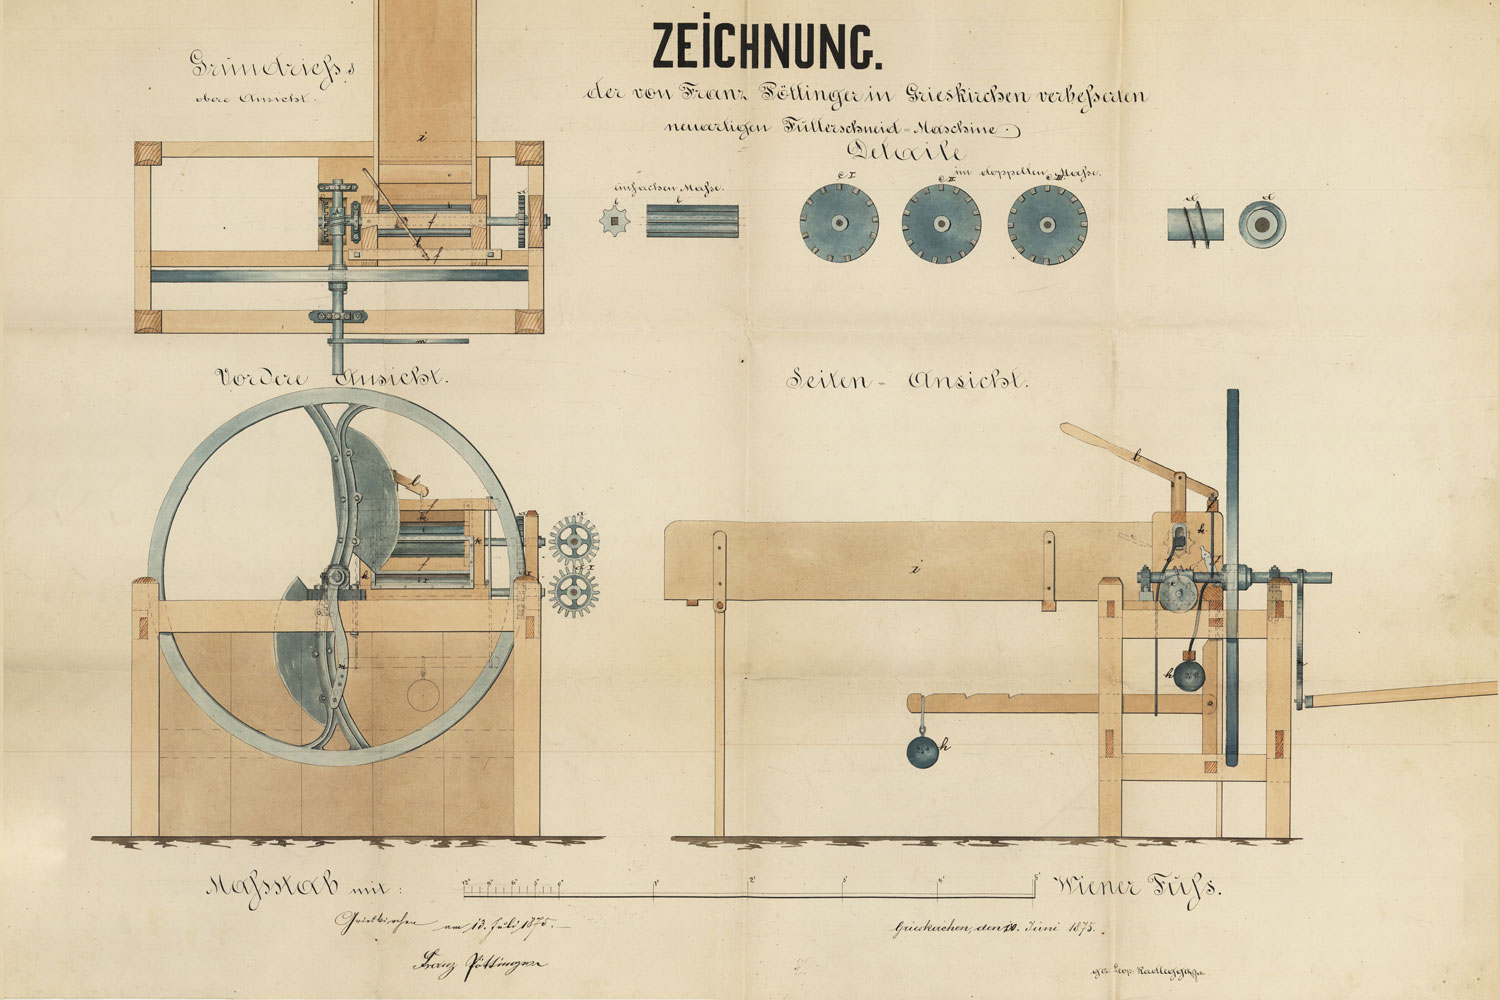 1875: The first patent